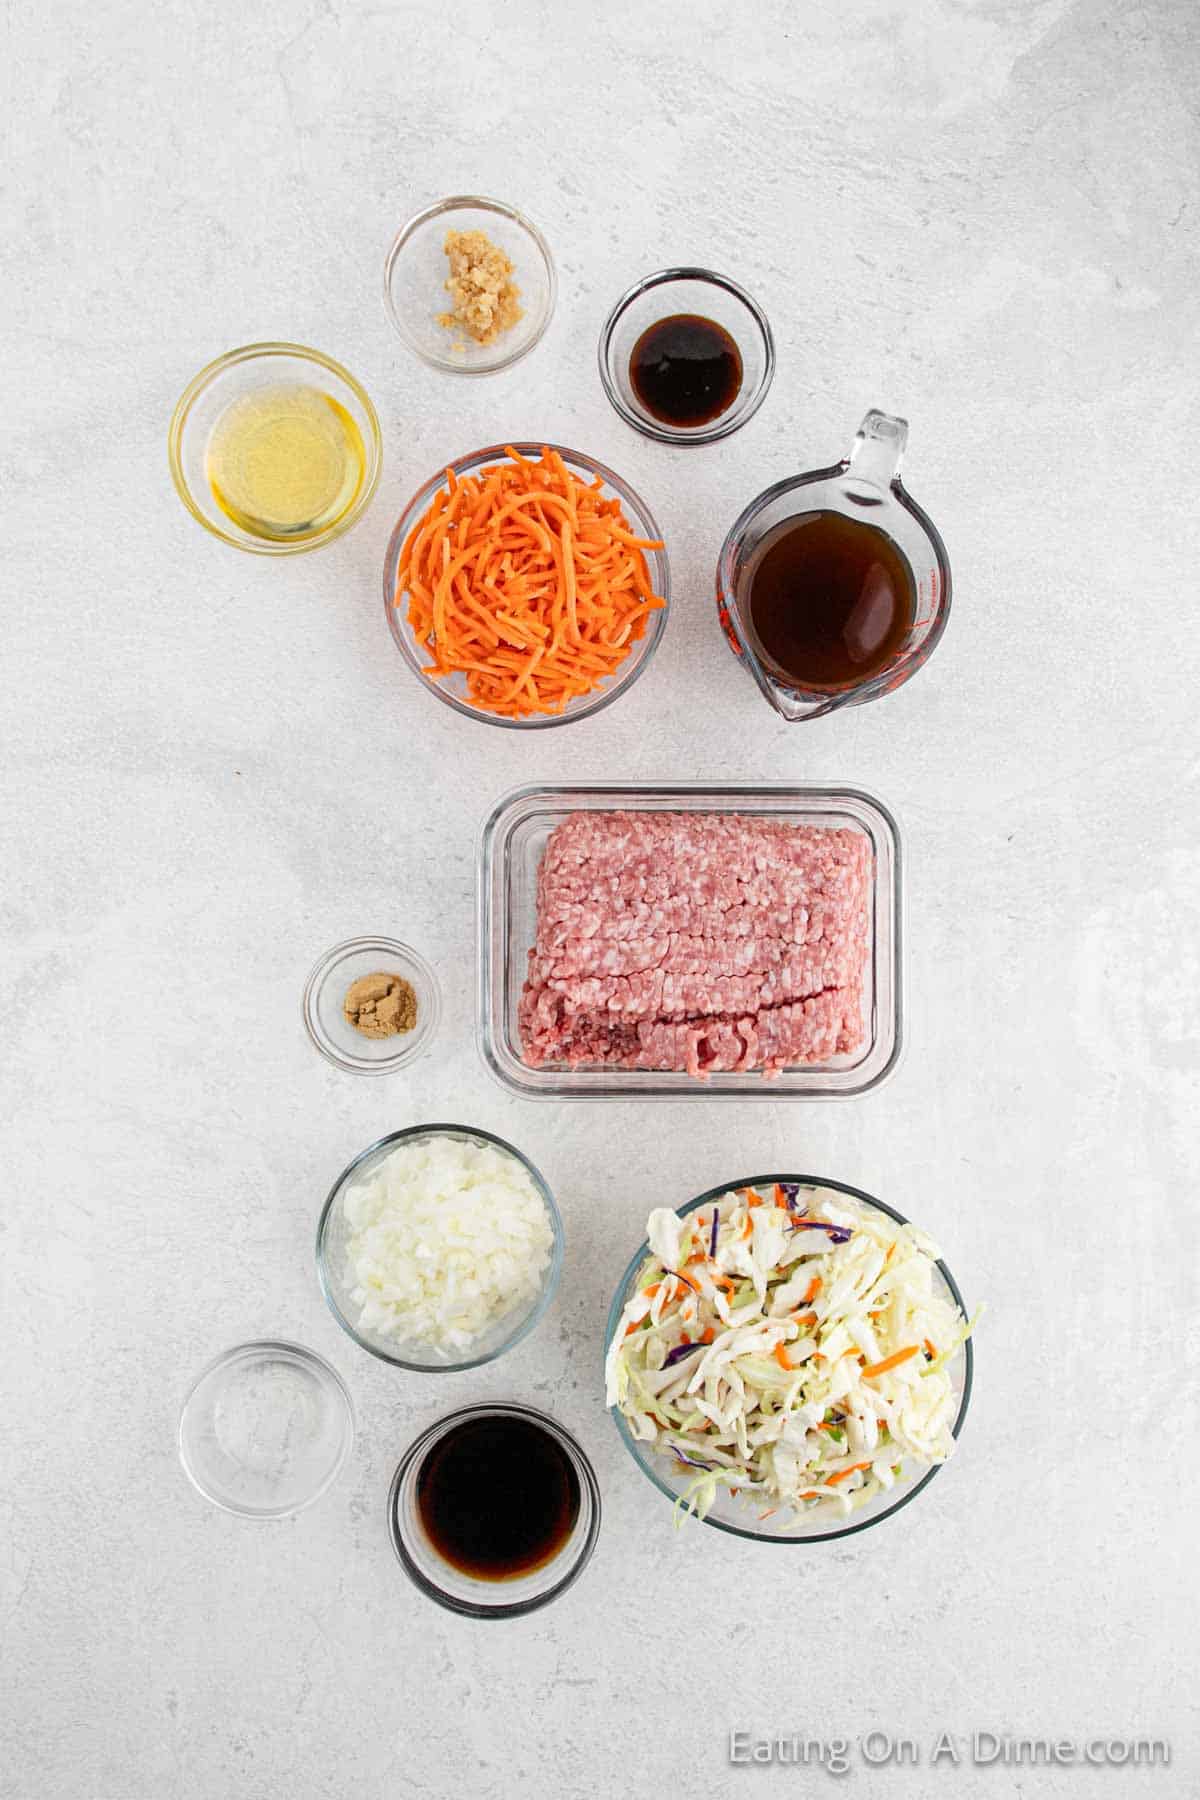 Egg Roll in a Bowl Ingredients - Ground Pork, Onion, Chicken Broth, garlic, sesame oil, rice vinegar, ginger, soy sauce, hoisin sauce, coleslaw mix, carrots, green onions